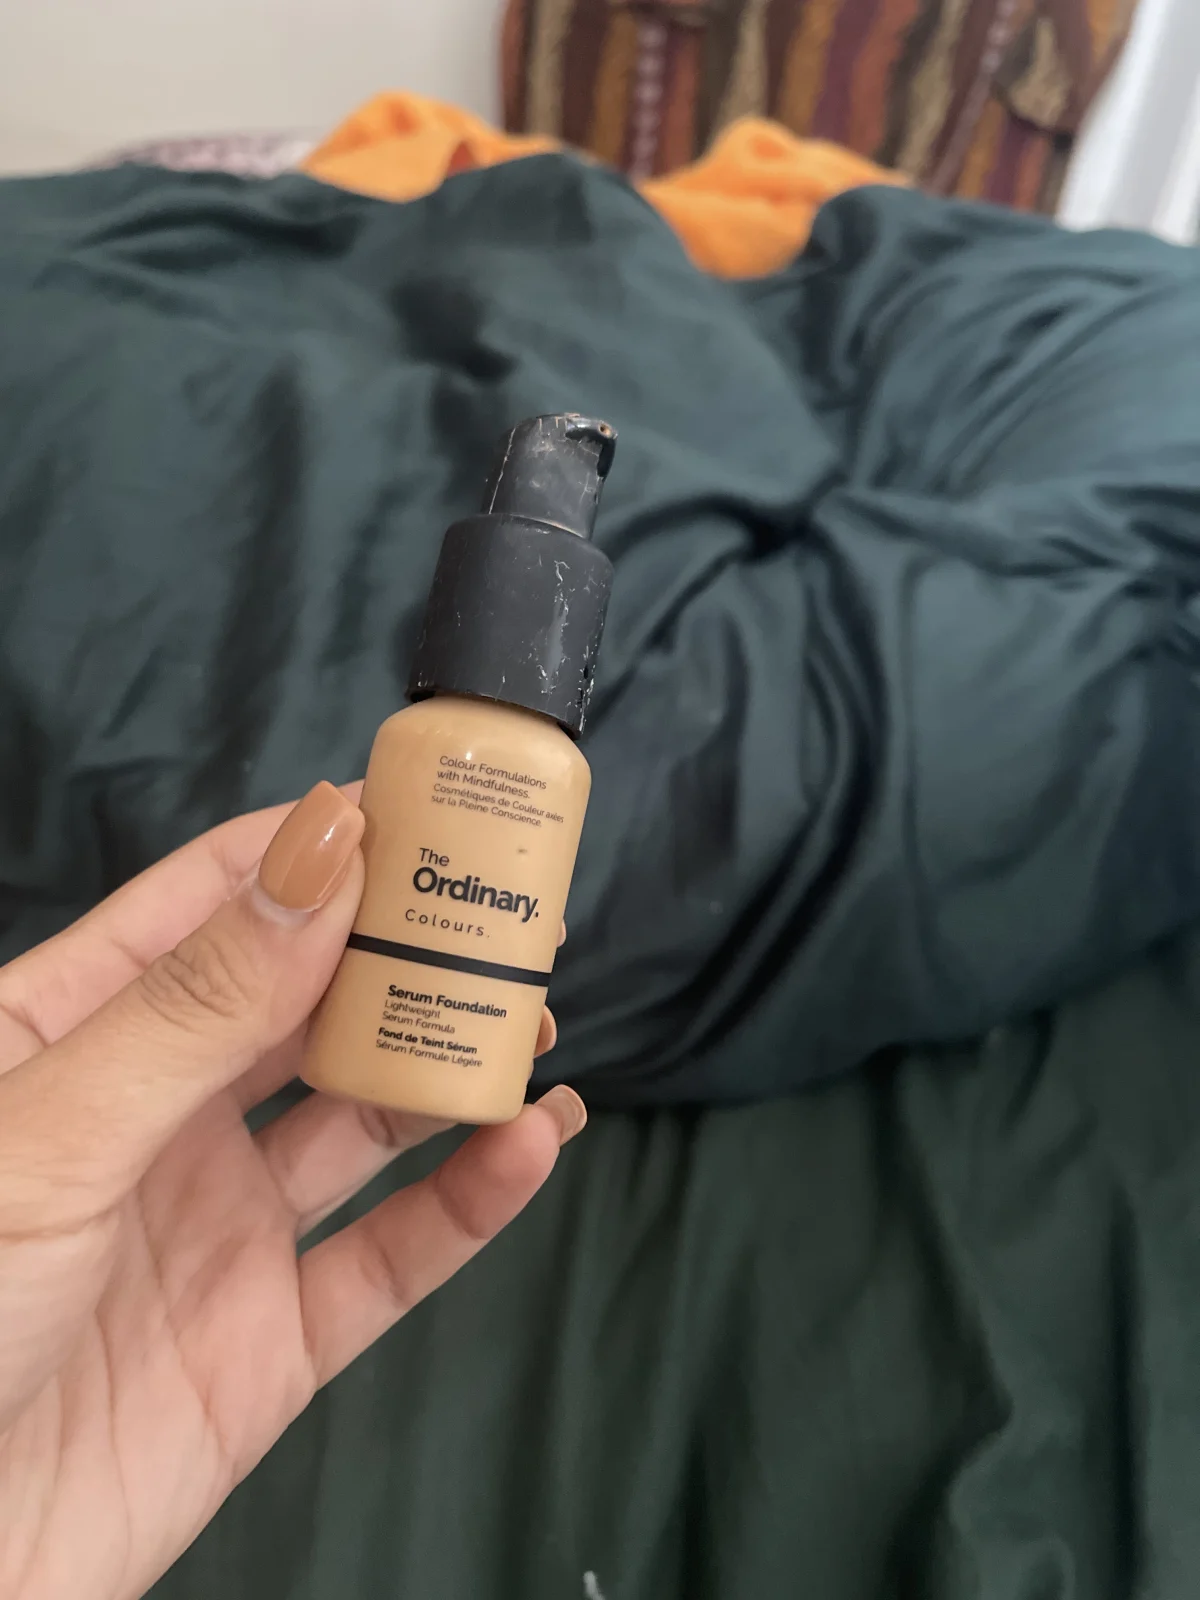 Coverage Foundation - review image